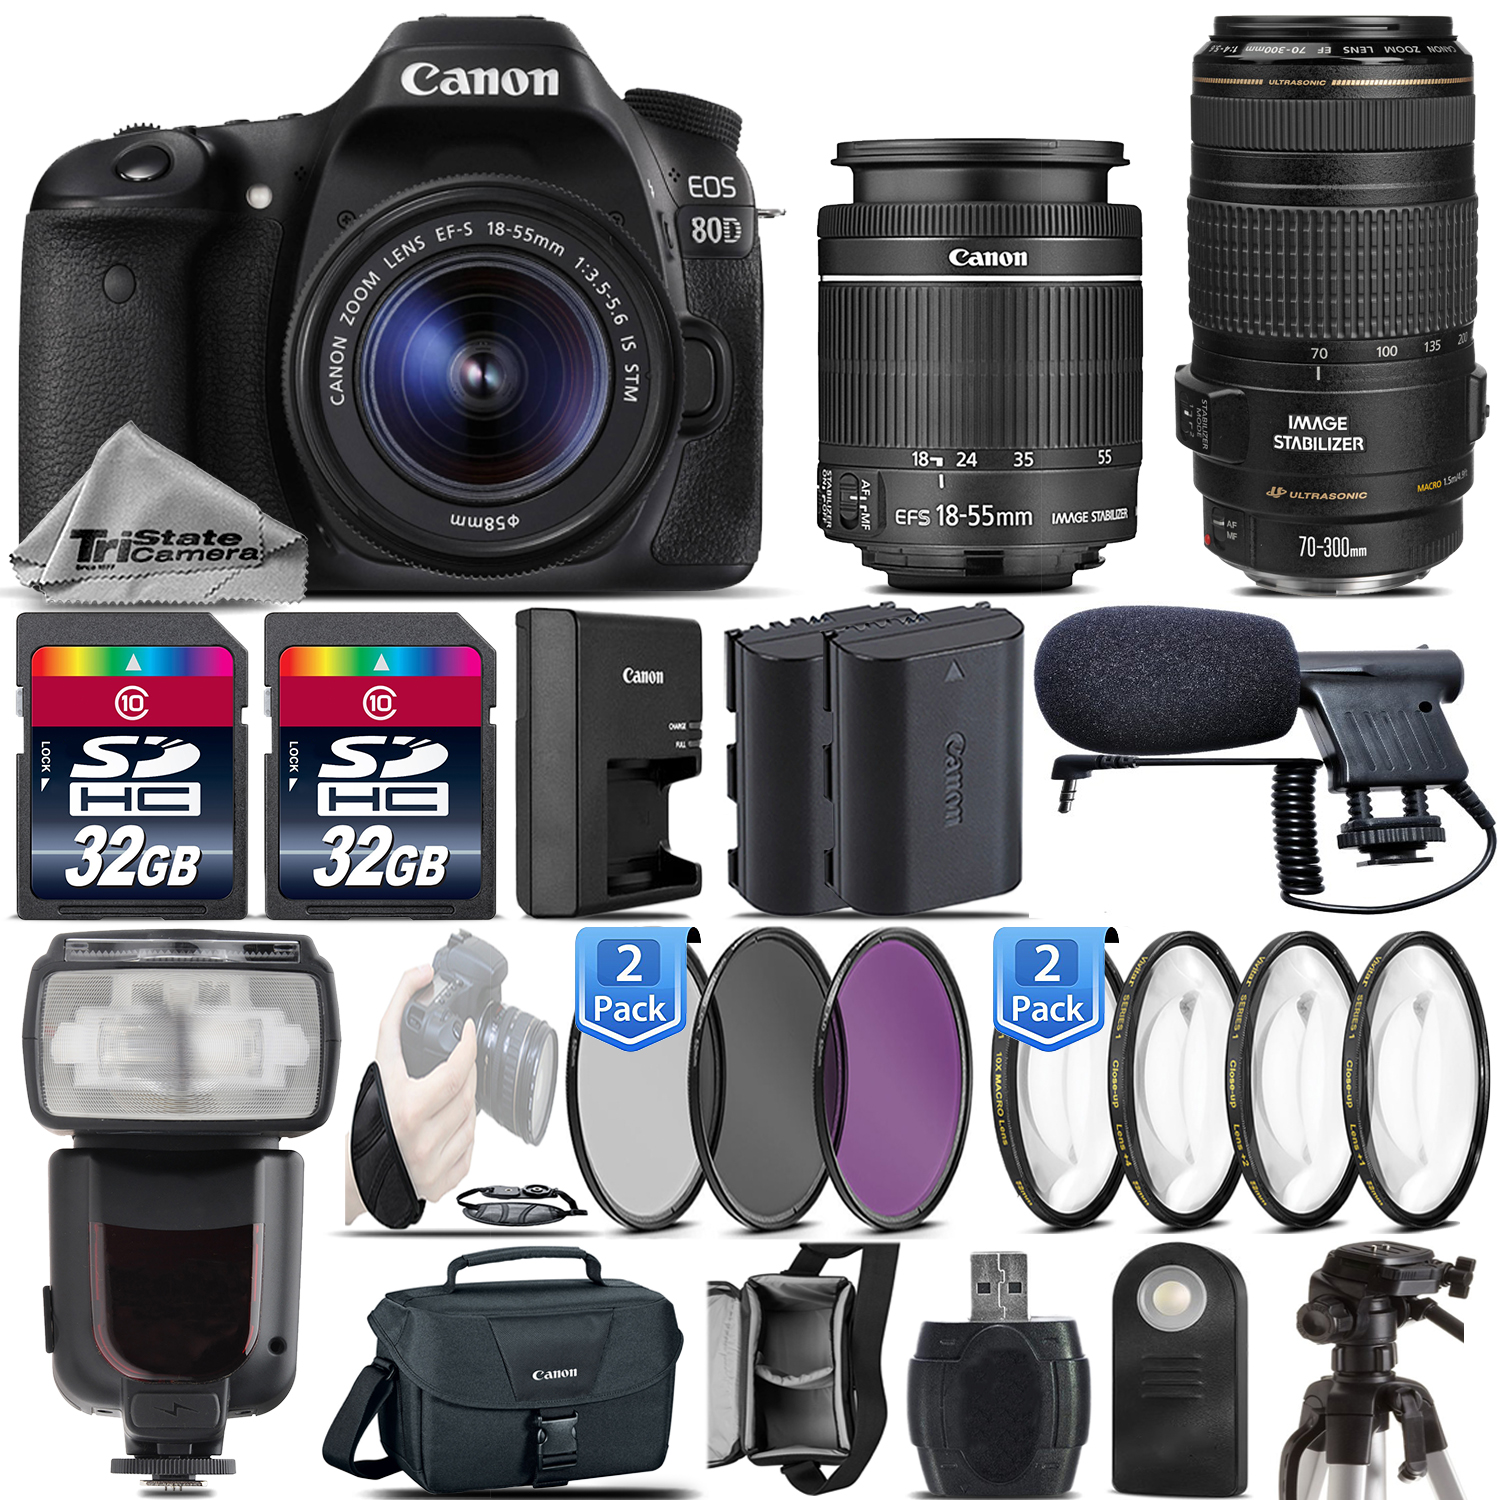 Canon 80D DSLR WiFi NFC DIGIC 6 24.2MP Camera + 18-55mm STM + 70-300mm IS USM *FREE SHIPPING*